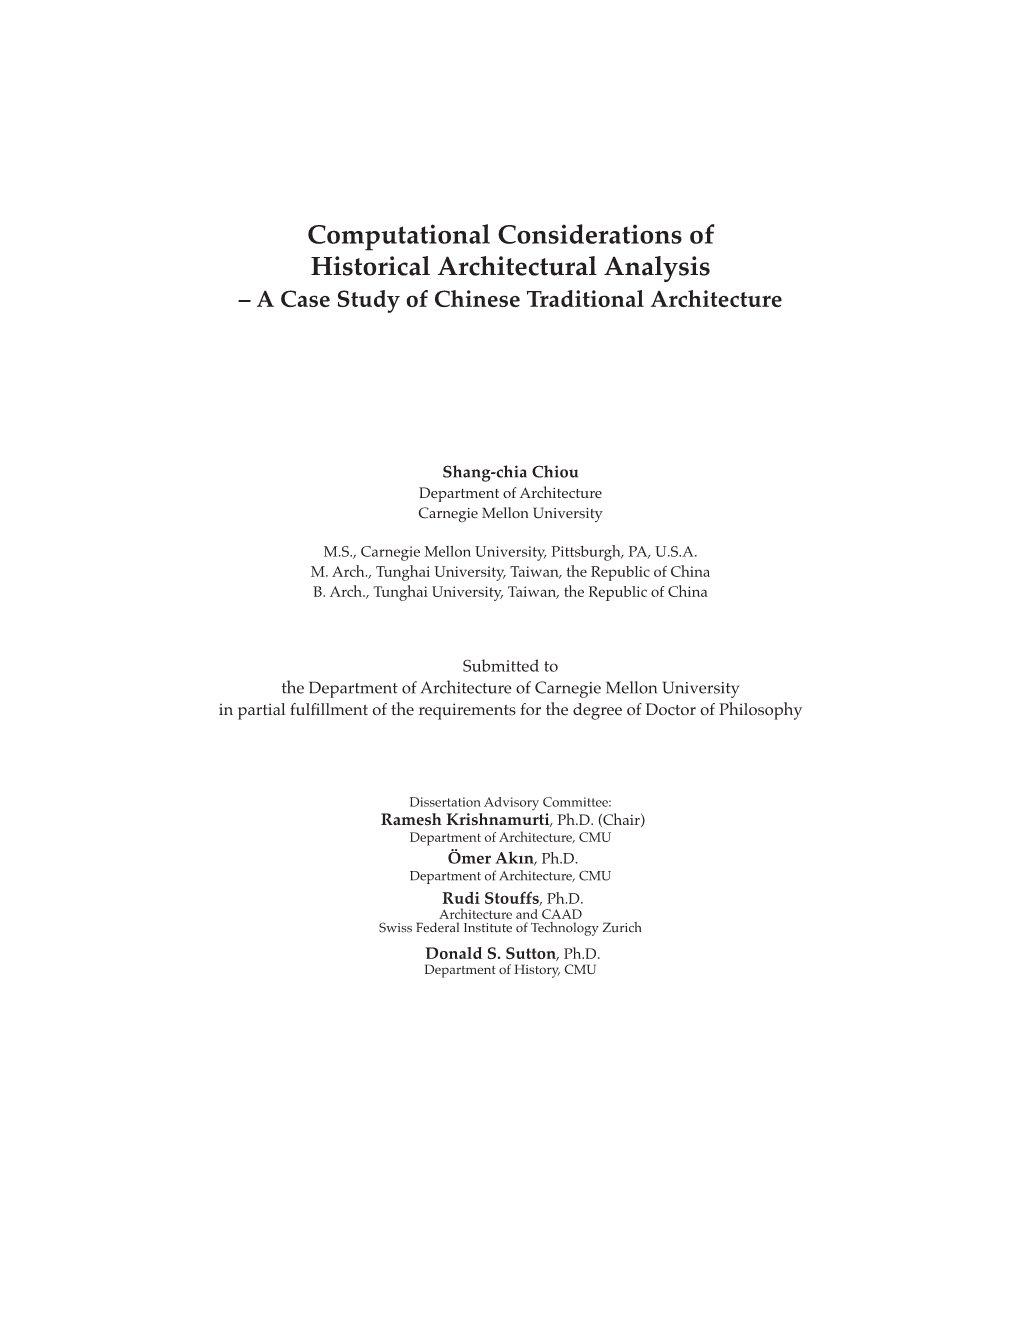 Computational Considerations of Historical Architectural Analysis – a Case Study of Chinese Traditional Architecture